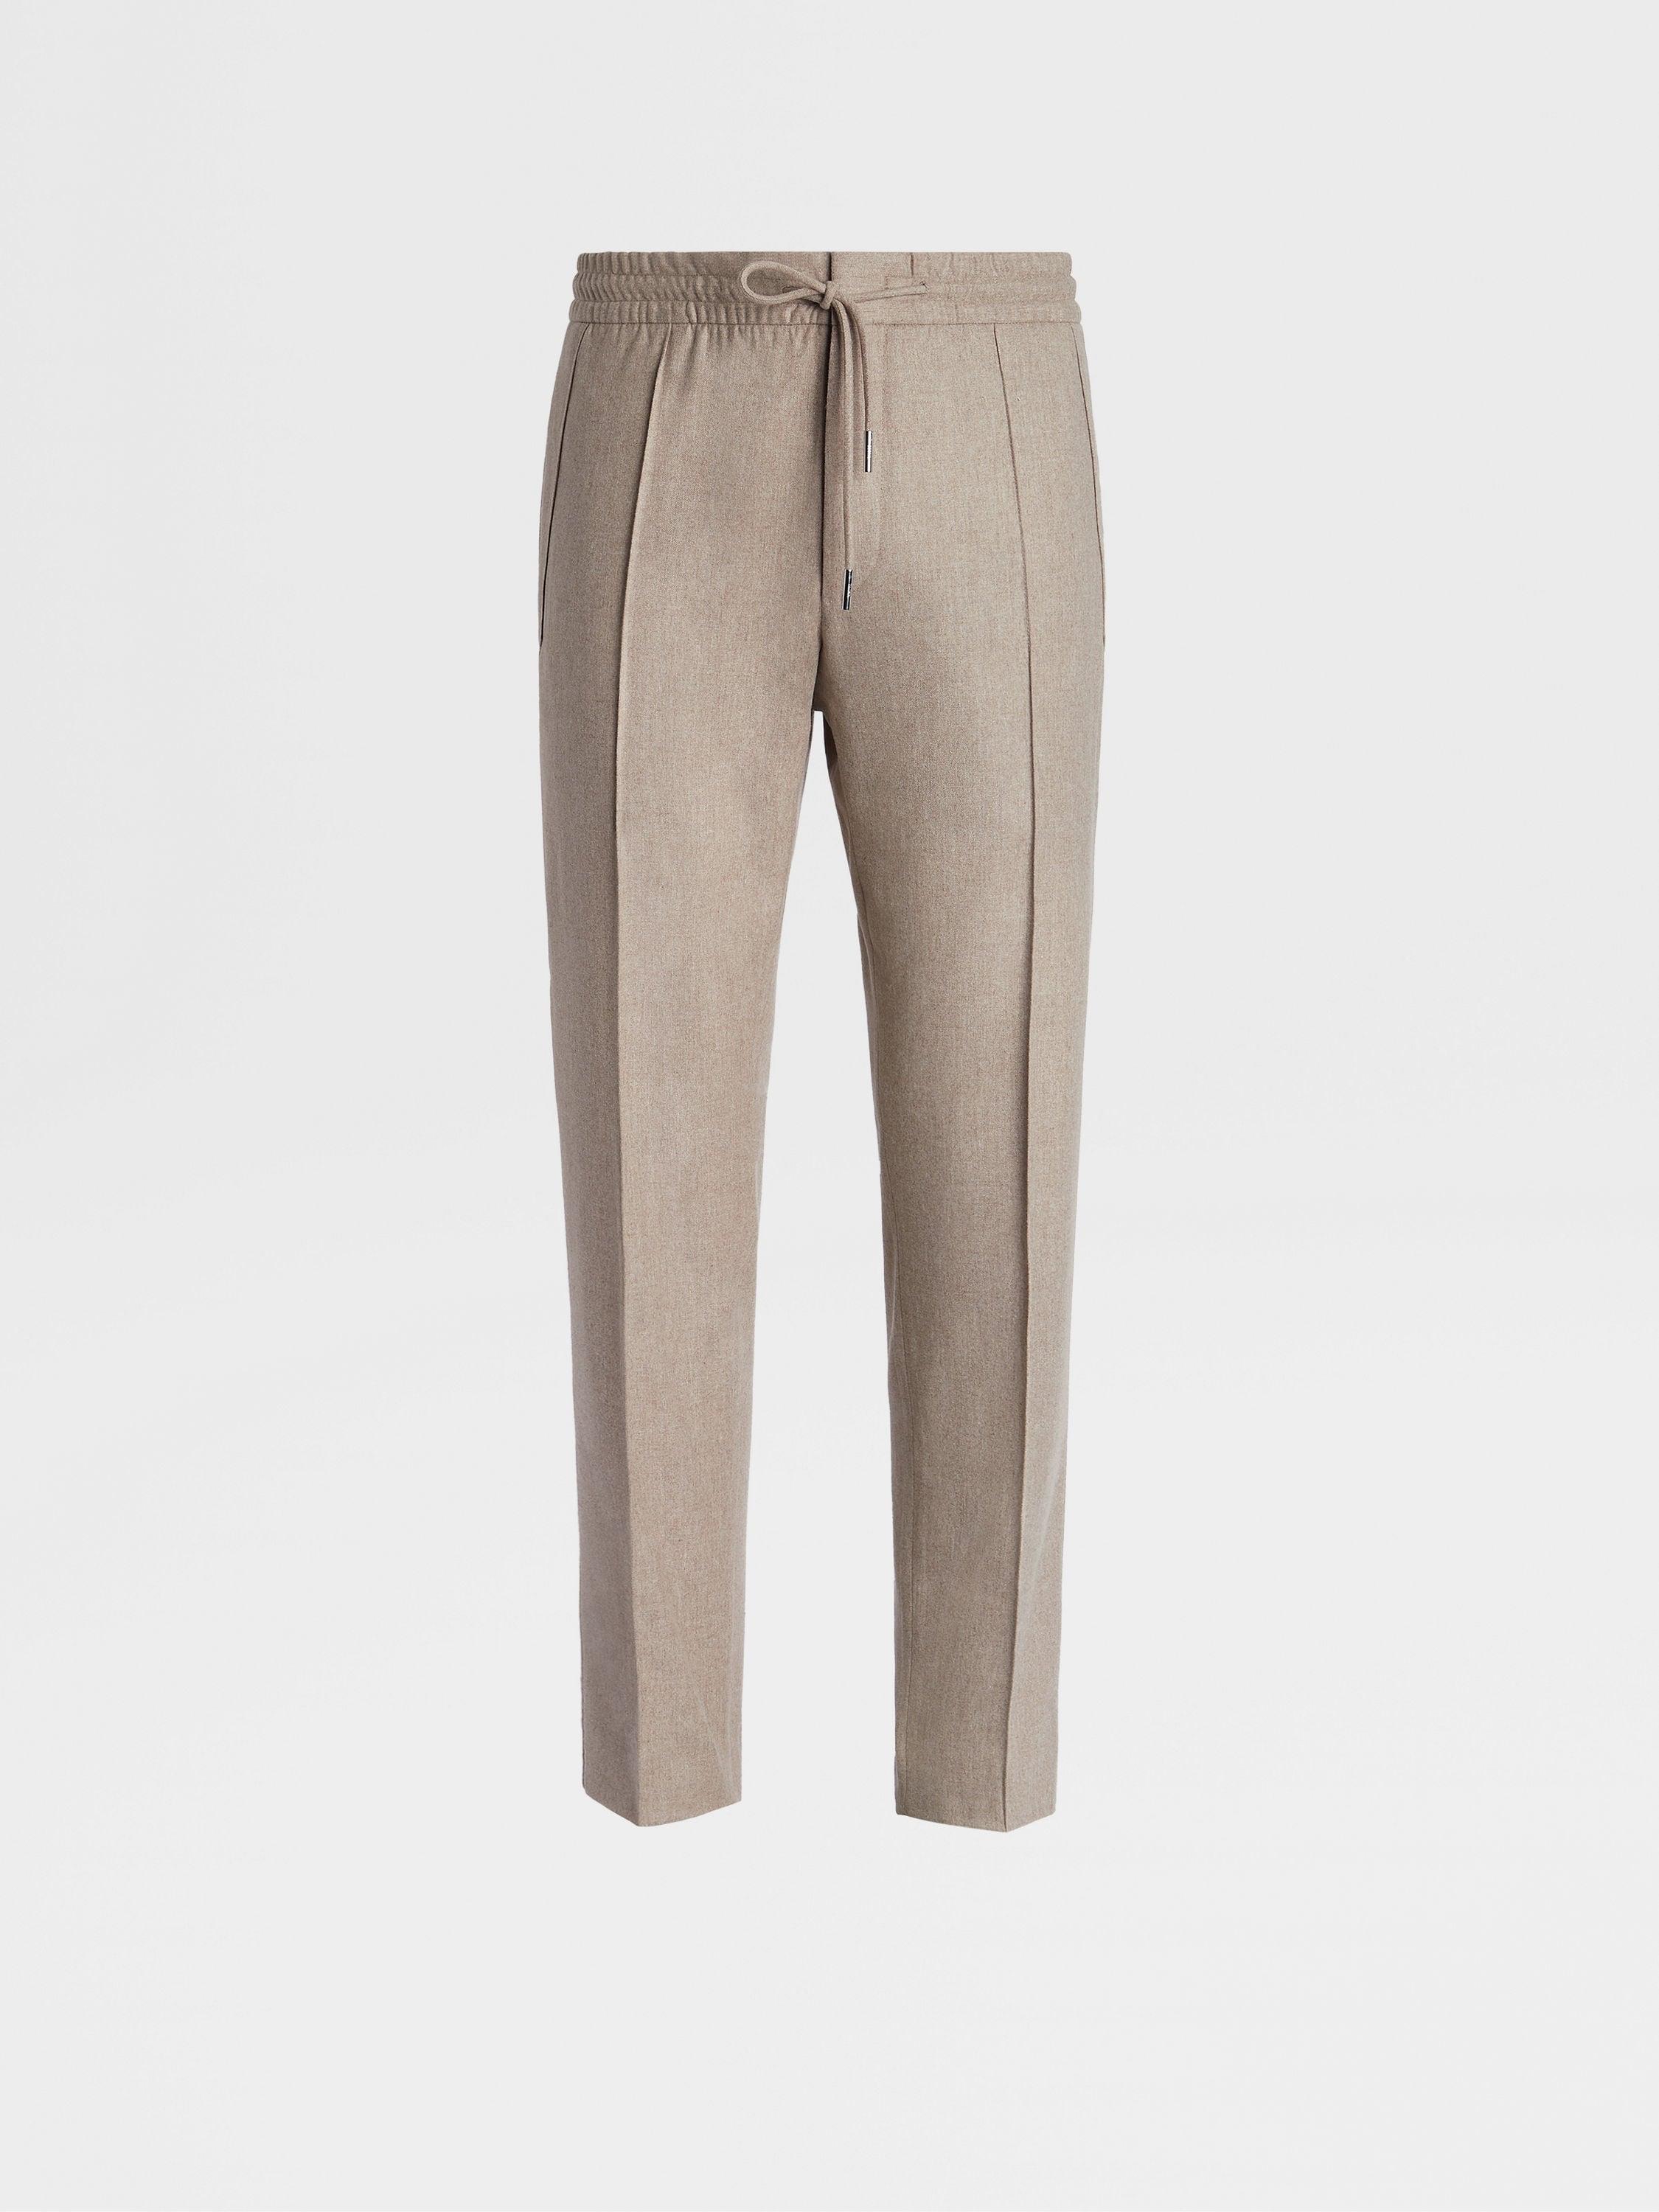 Light Taupe 14milmil14 Wool Blend Joggers FW23 28046499 | Zegna LU